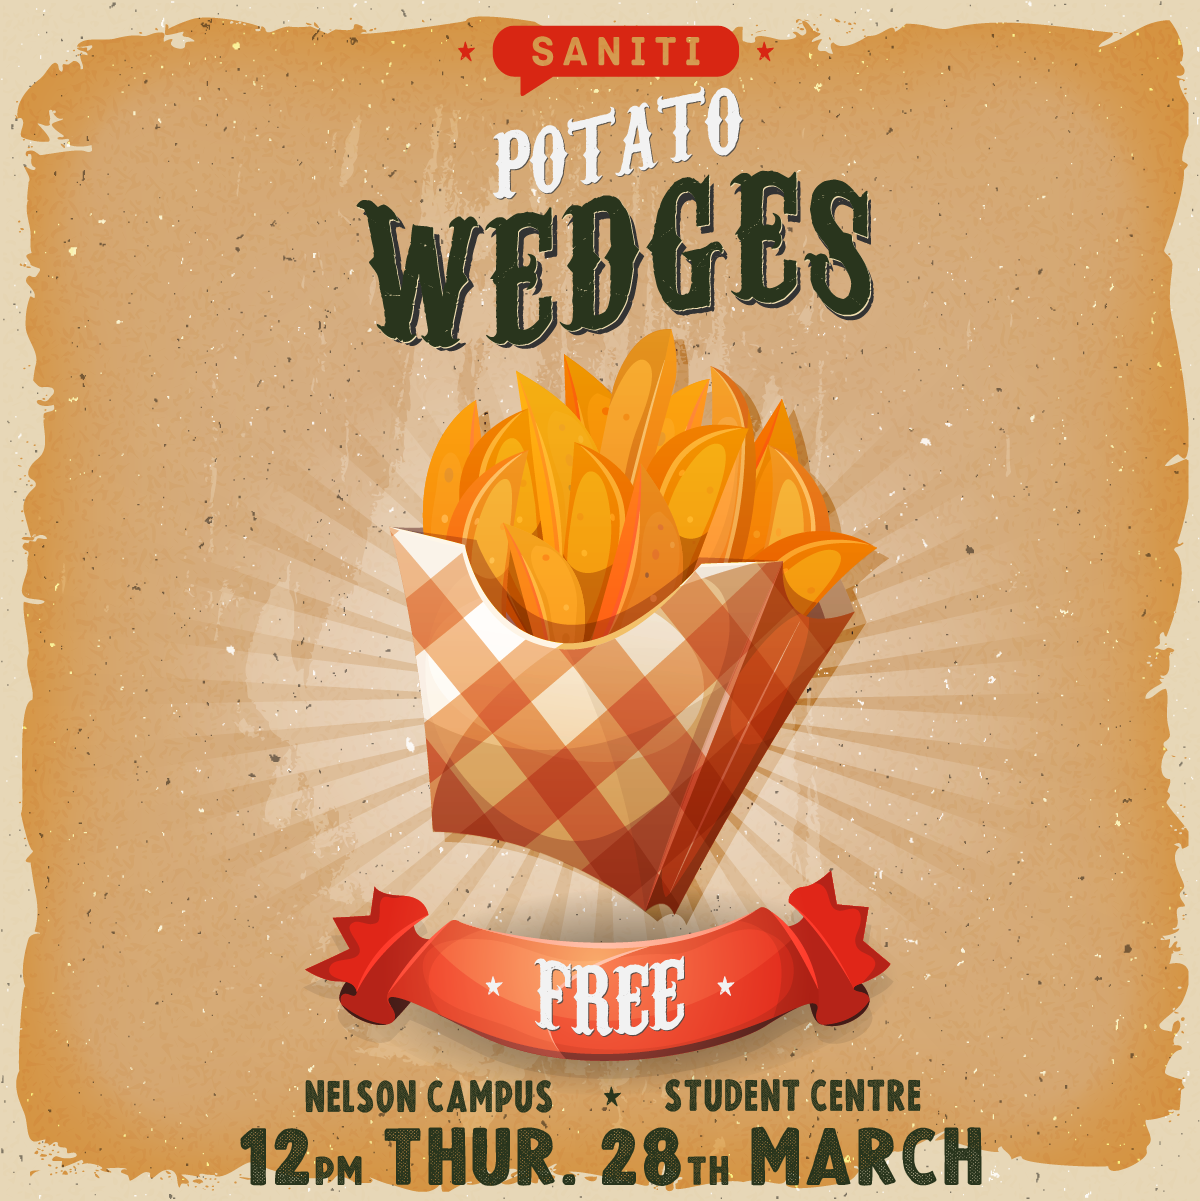 Free Wedges March 28 Nelson Social